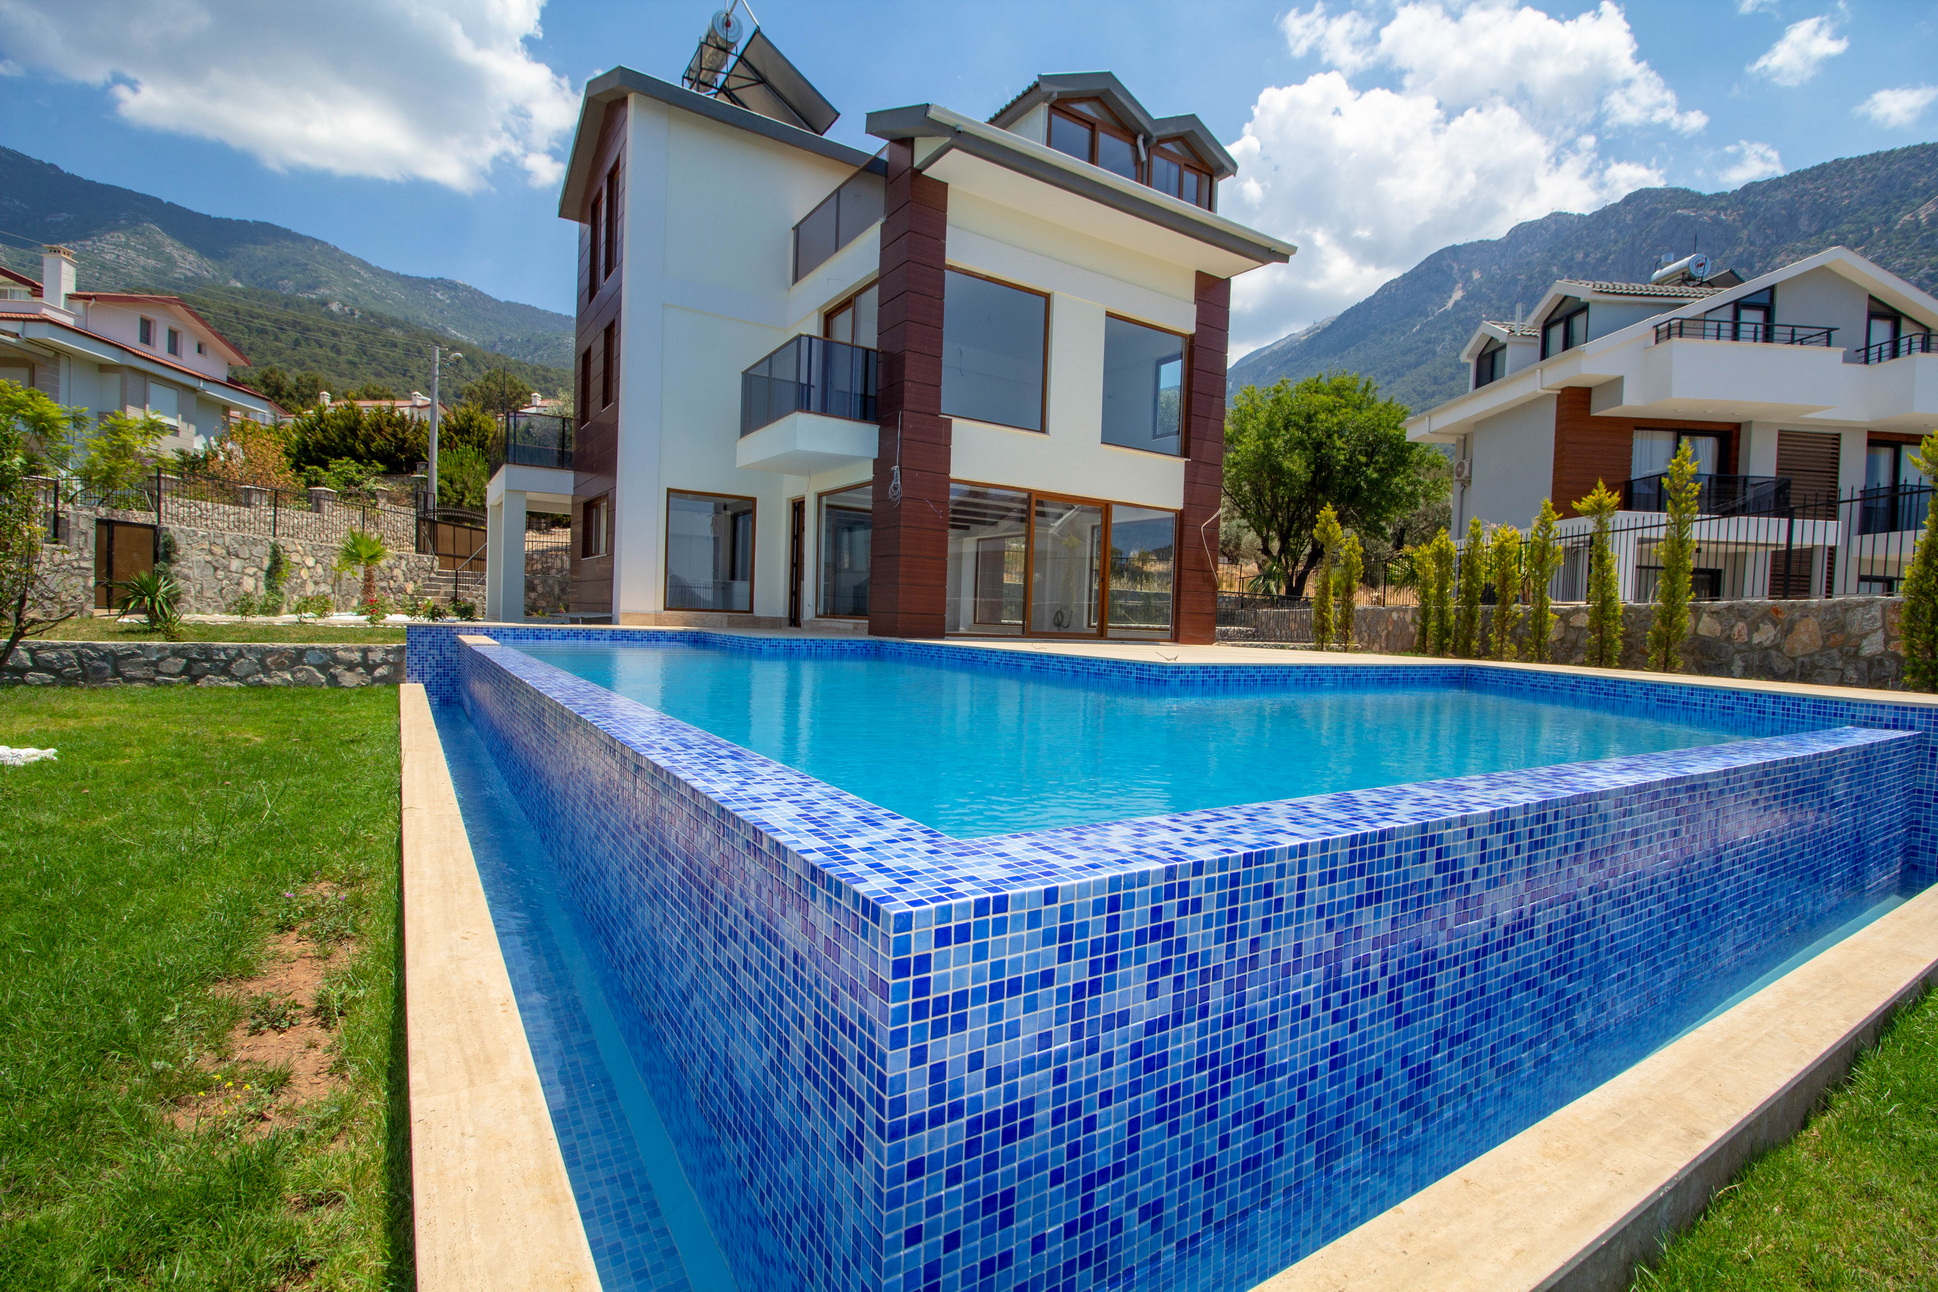 5 Bedroom Triplex Luxury Villa with Swimming Pool For Sale